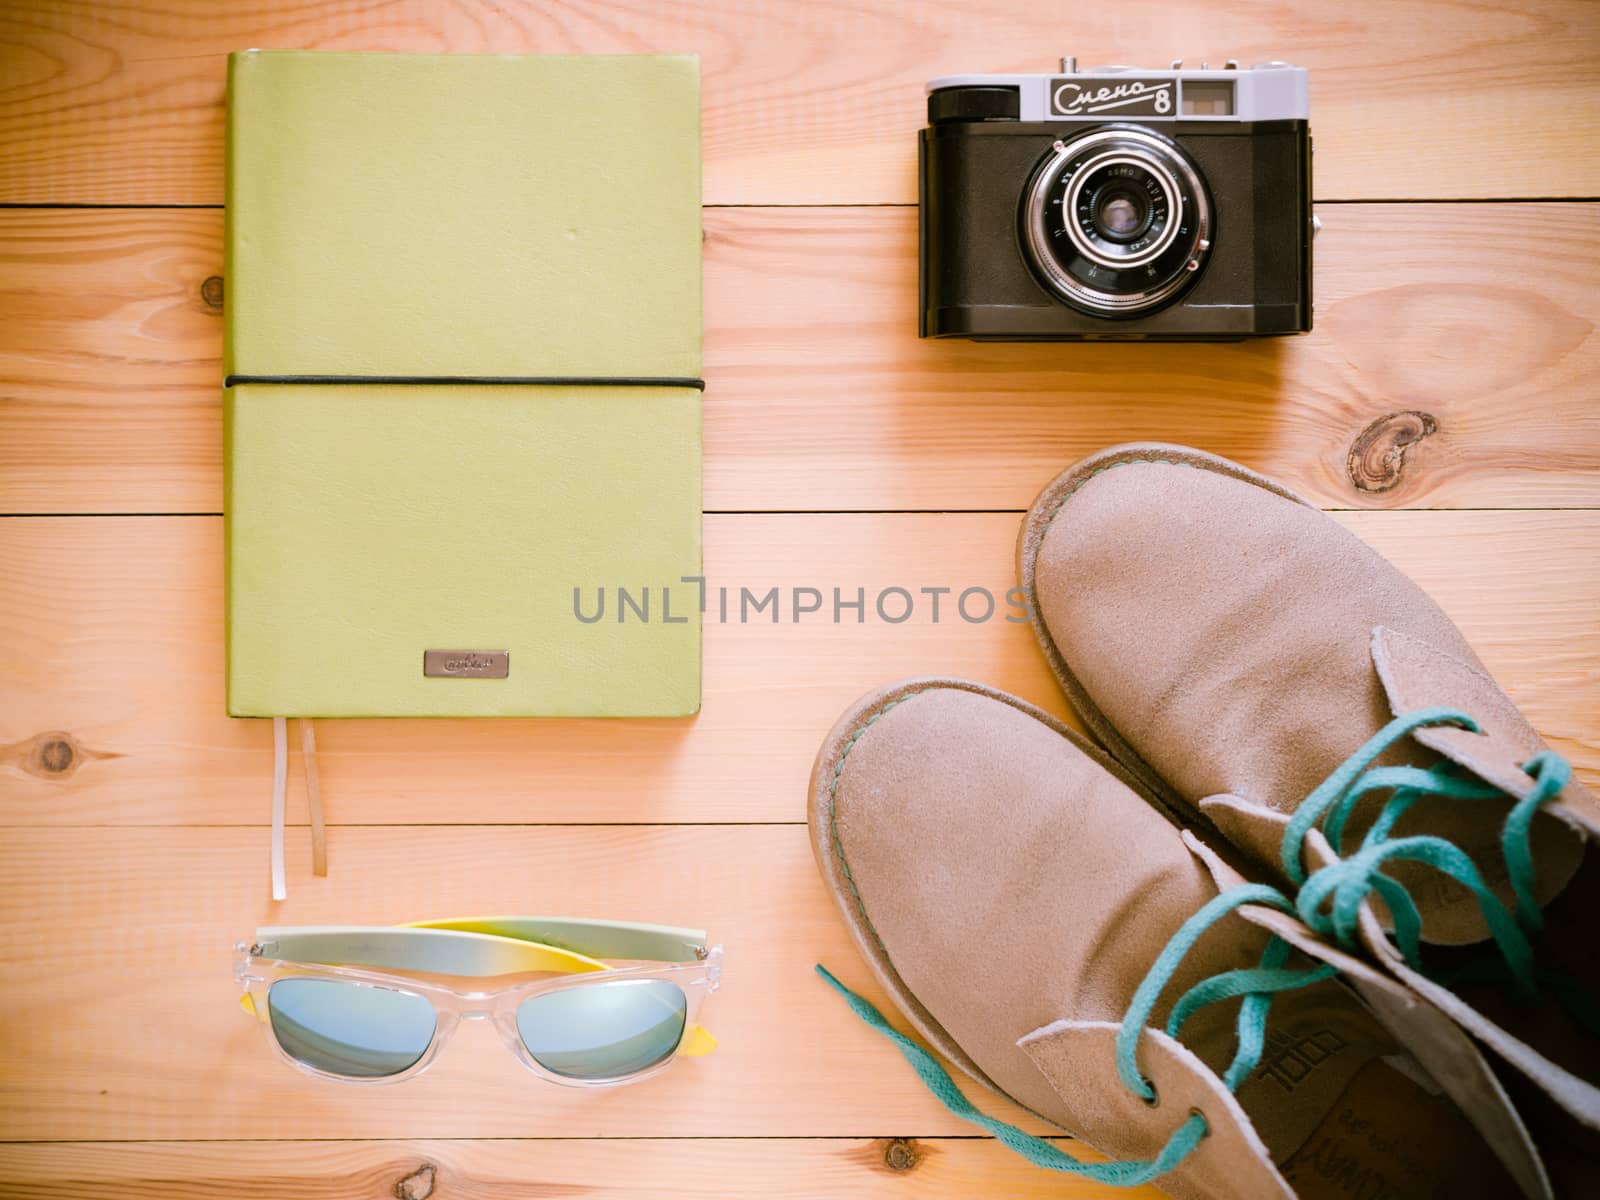 Set of travel and resort stuff. Old 35 mm camera, note book, sunglasses and desert boots on wooden table. Top view, flat lay